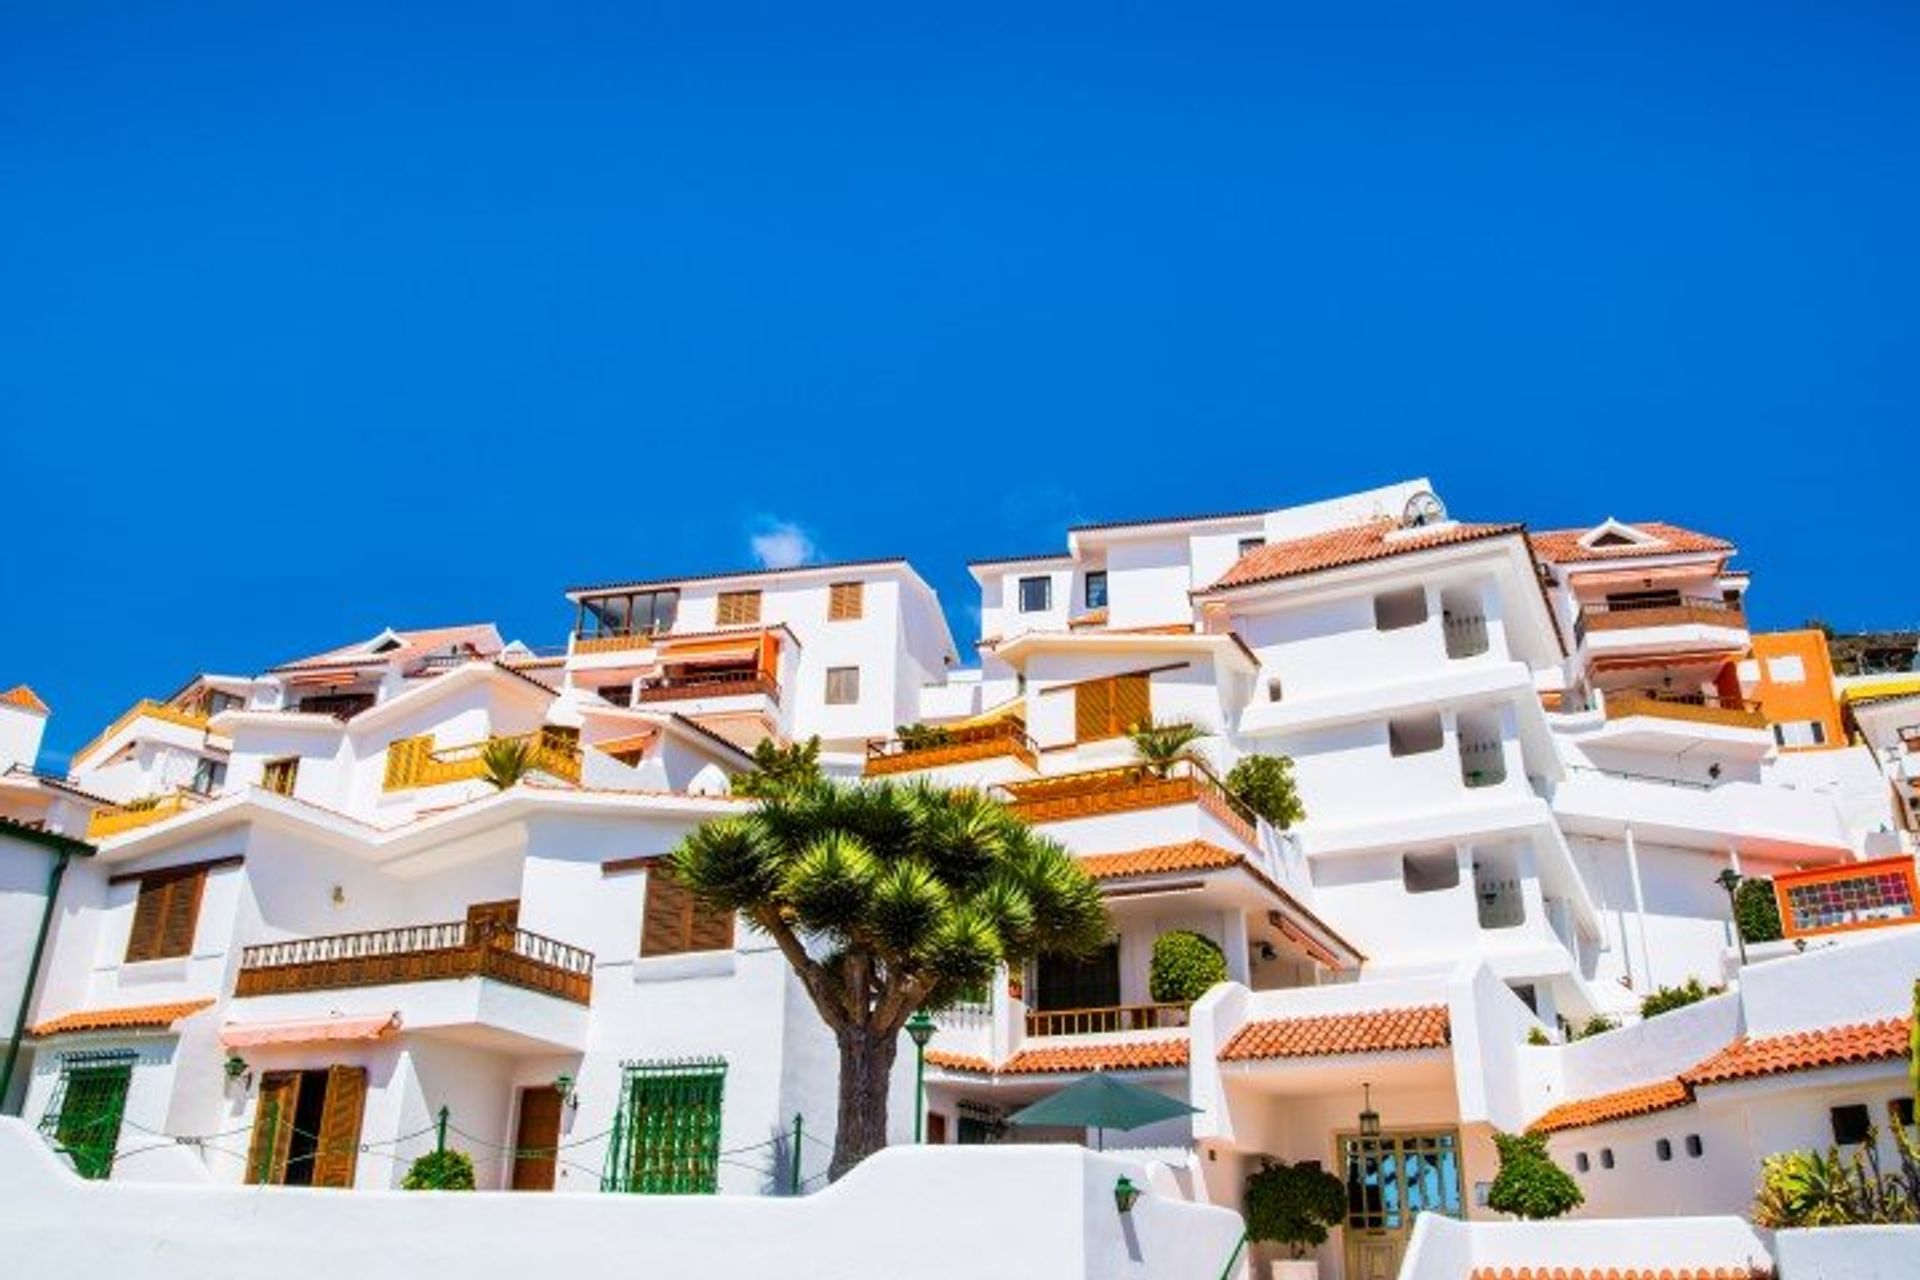 The typical Canarian whitewashed architecture of Los Cristianos, Costa Adeje and Las Americas